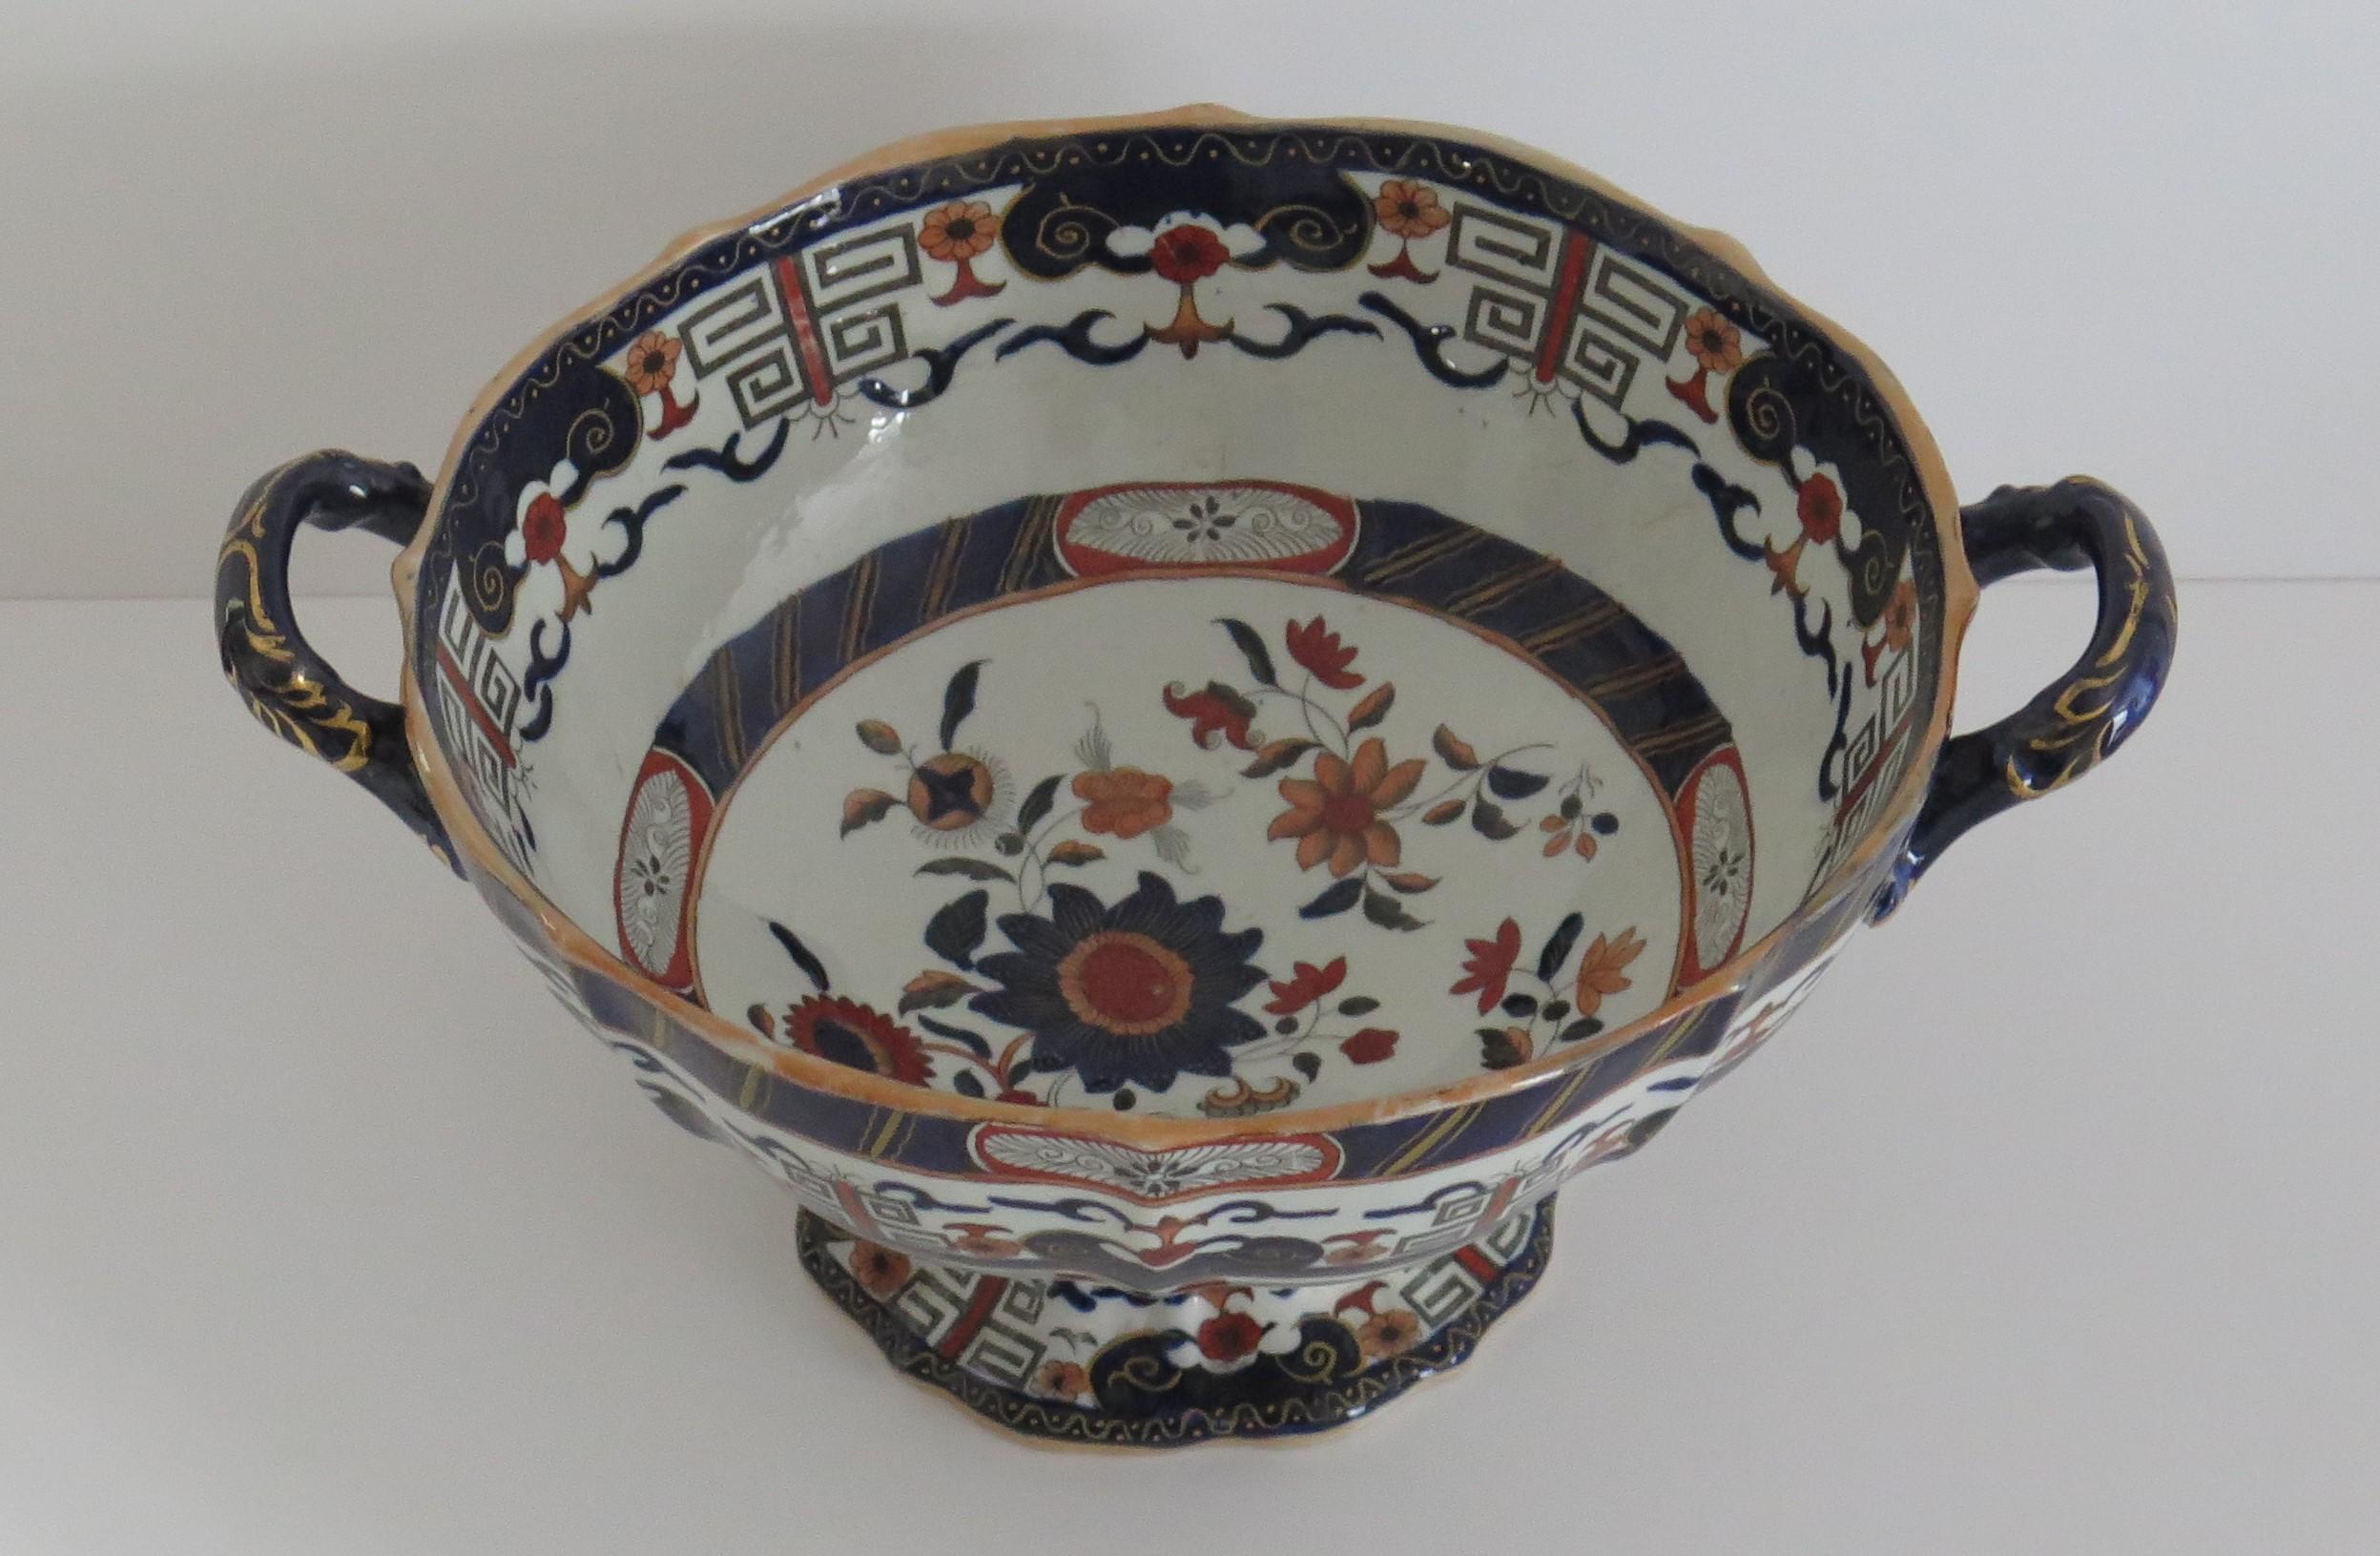 19th Century Large Mason's Ironstone Bowl in Chinoiserie Greek Key floral Pattern, circa 1838